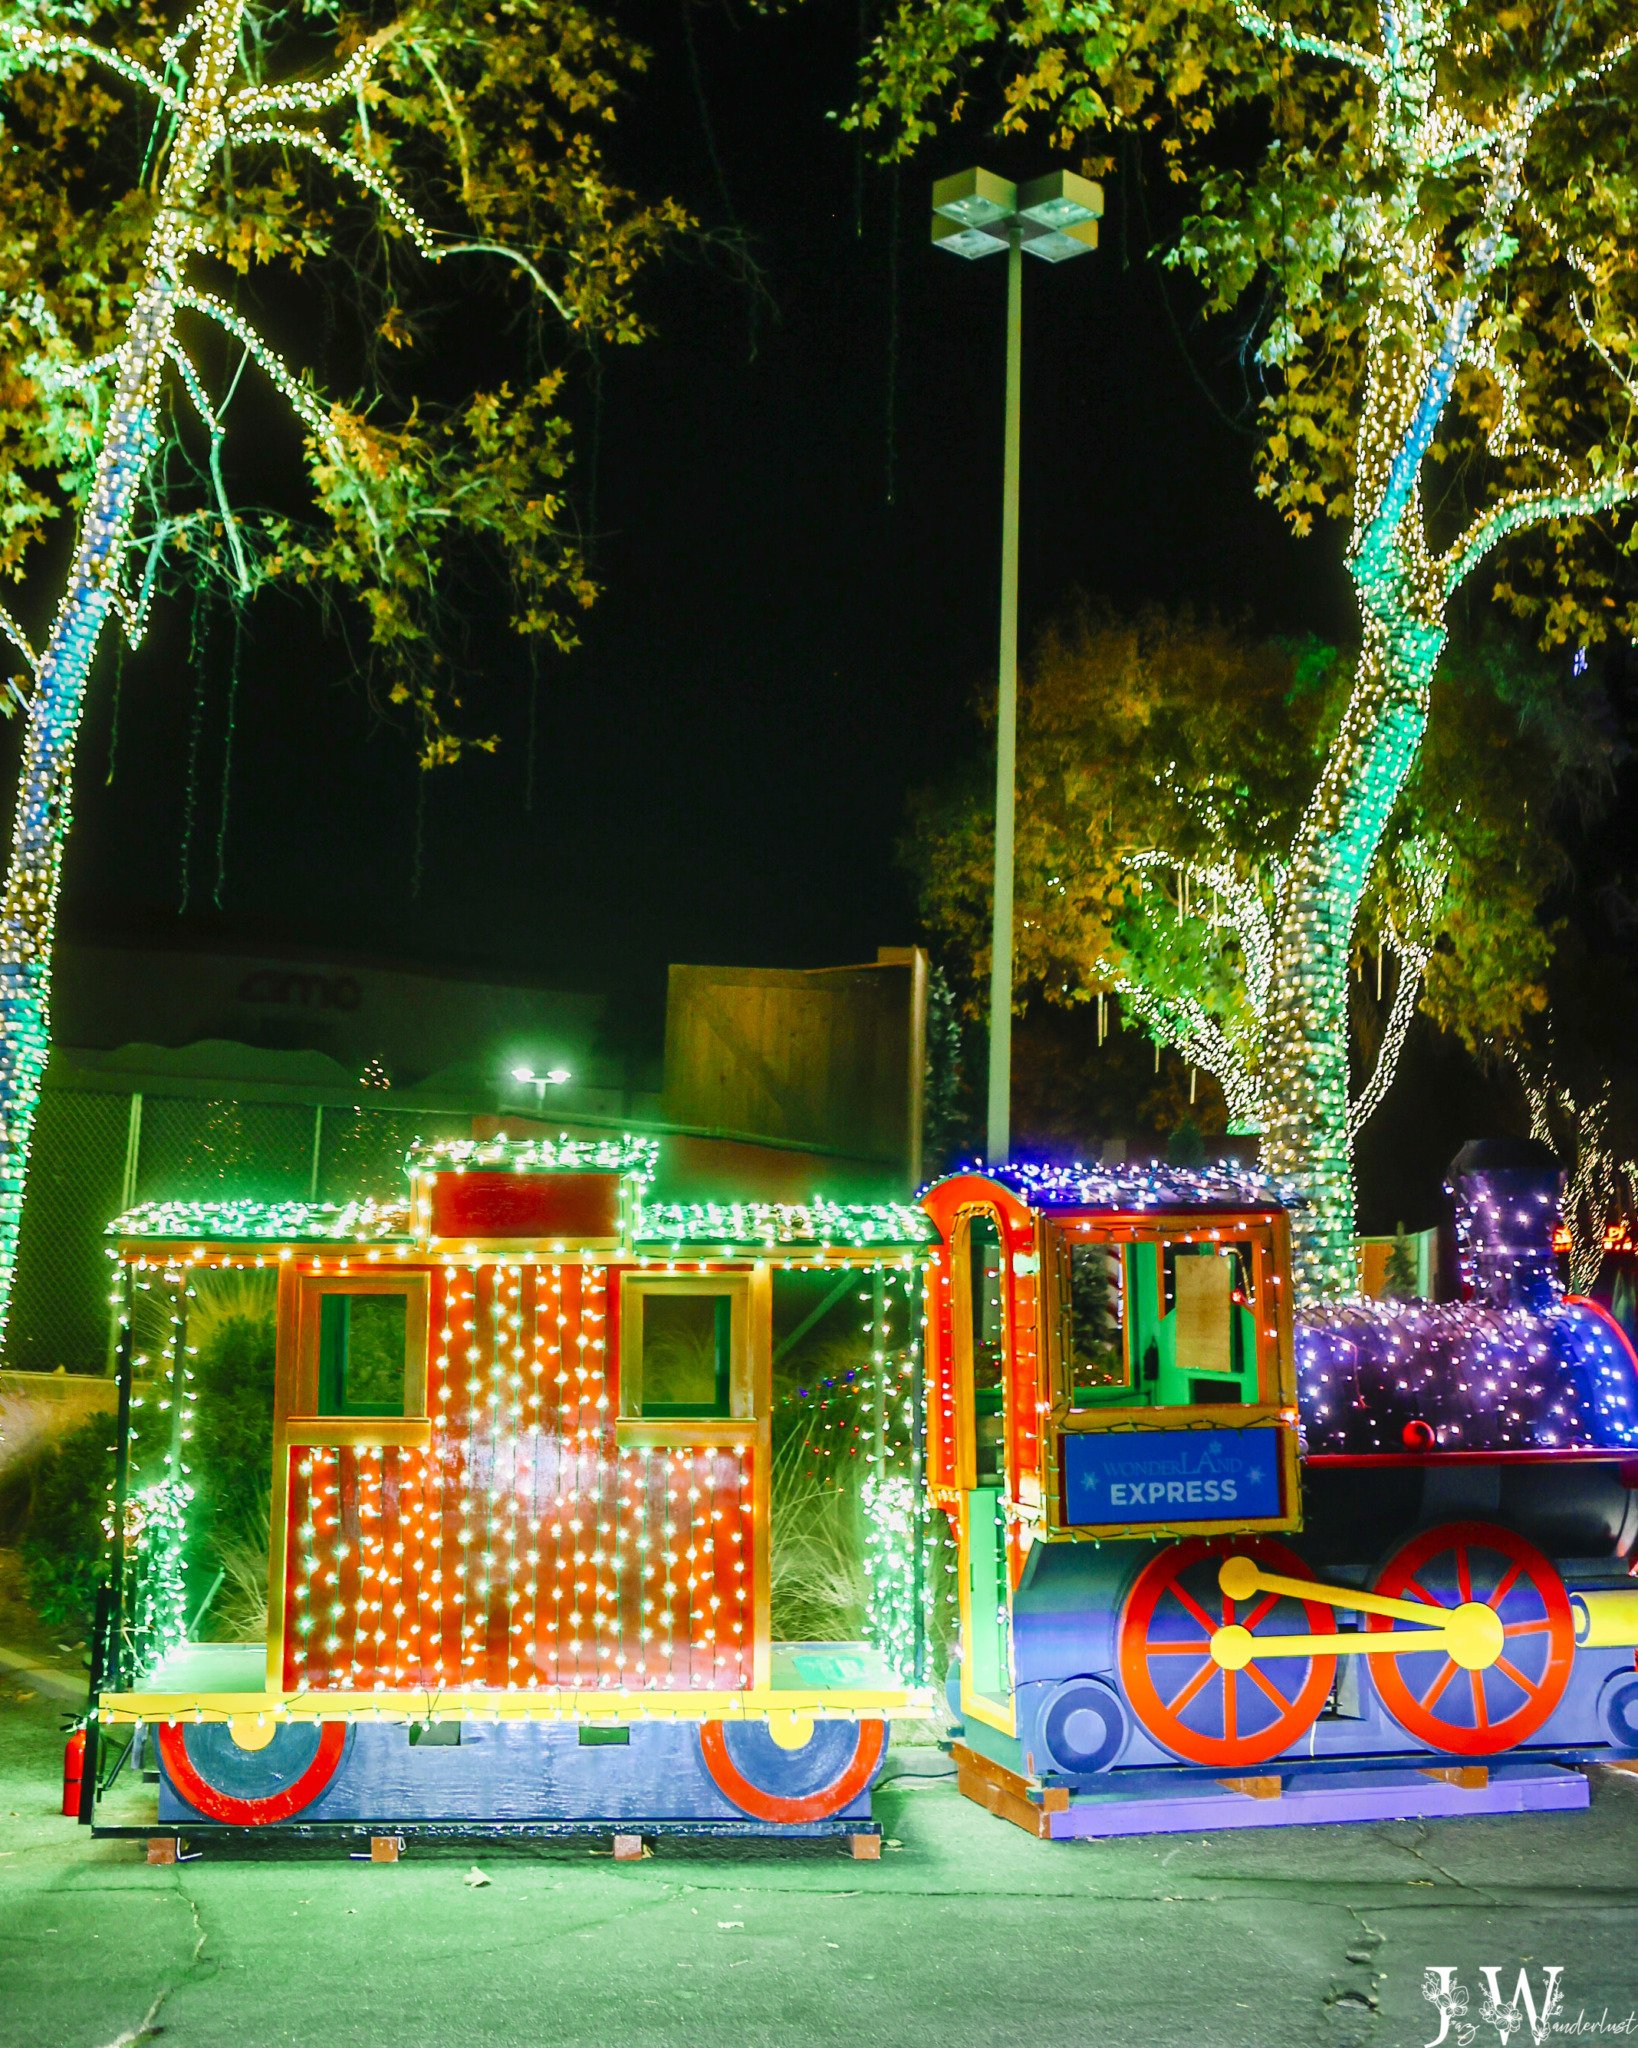 Holiday train decorations at Southern California Christmas decorations. Photography by Jaz Wanderlust.